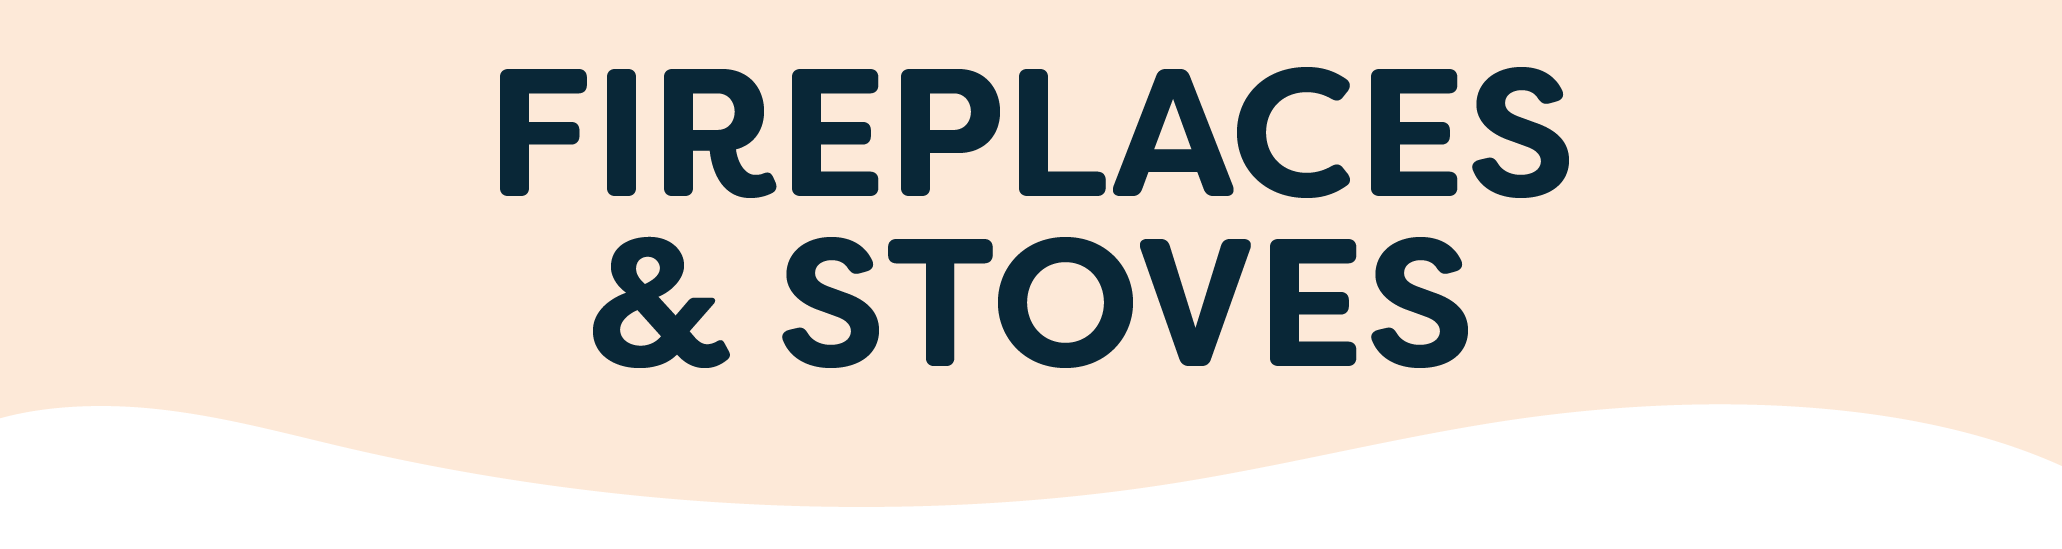 Fireplaces & Stoves Blog Header at Leisure Time Inc.